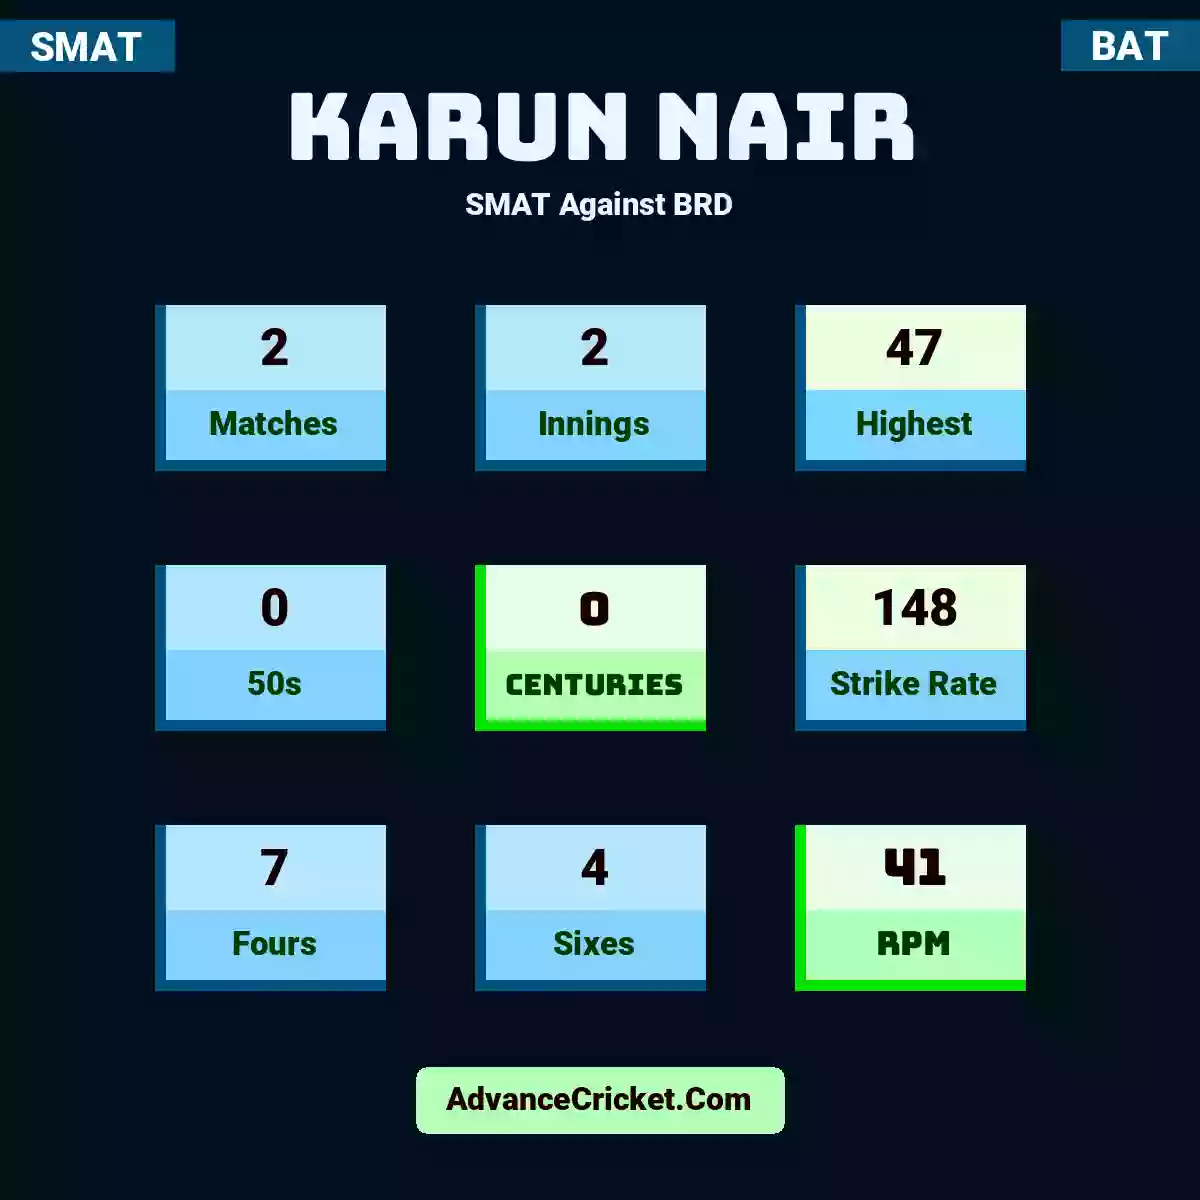 Karun Nair SMAT  Against BRD, Karun Nair played 2 matches, scored 47 runs as highest, 0 half-centuries, and 0 centuries, with a strike rate of 148. K.Nair hit 7 fours and 4 sixes, with an RPM of 41.